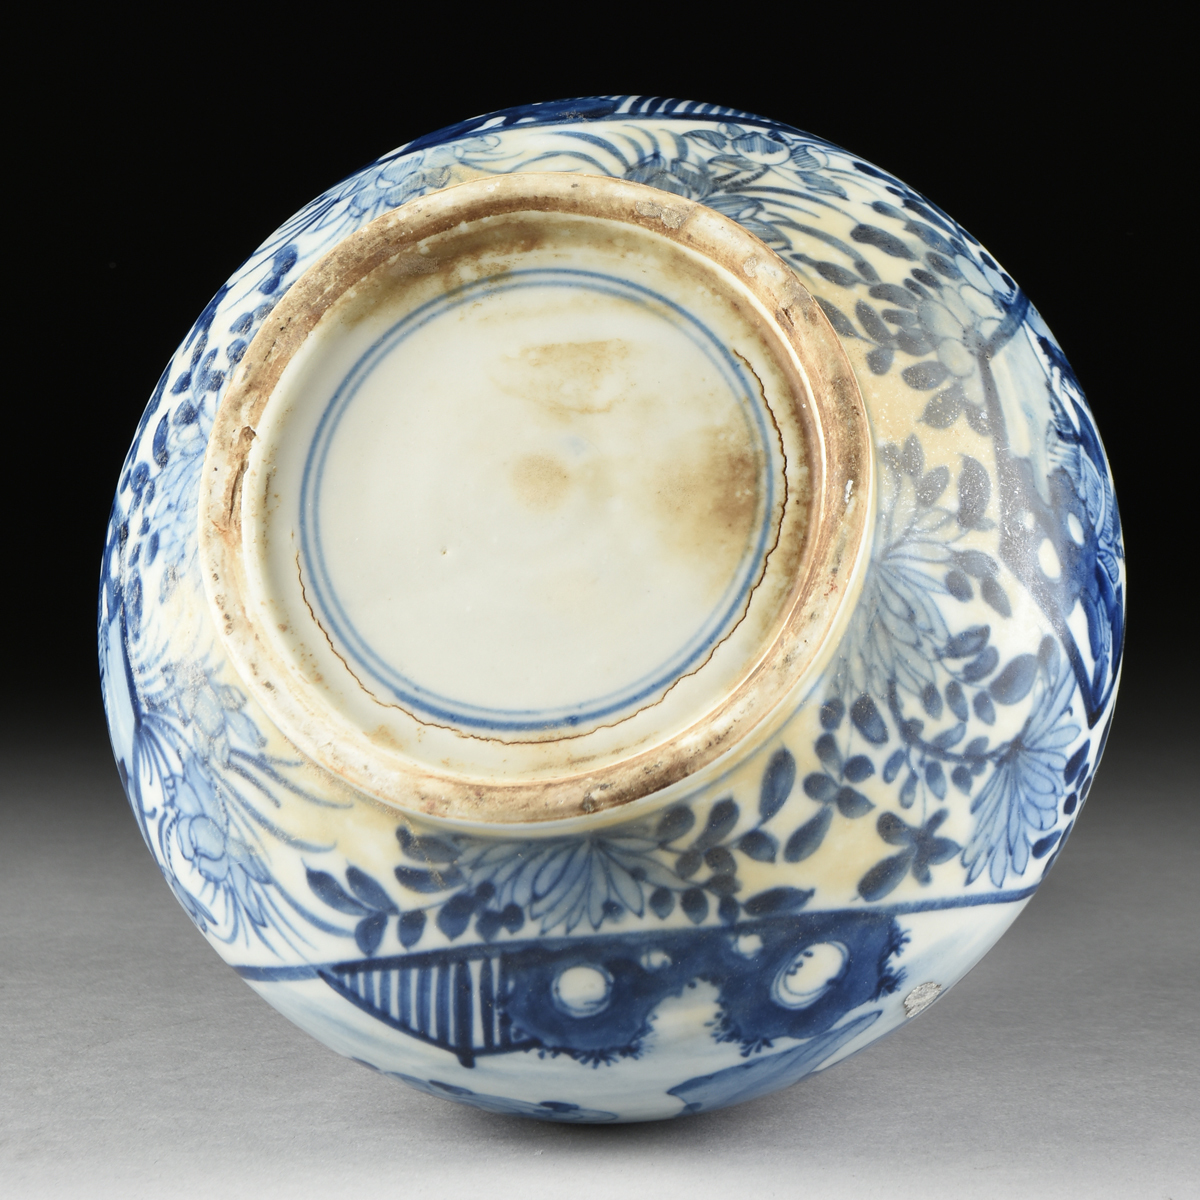 A QING DYNASTY BLUE AND WHITE PORCELAIN BOTTLE VASE, SHIPWRECK ARTIFACT, ATTRIBUTED TO THE KANGXI - Image 8 of 8